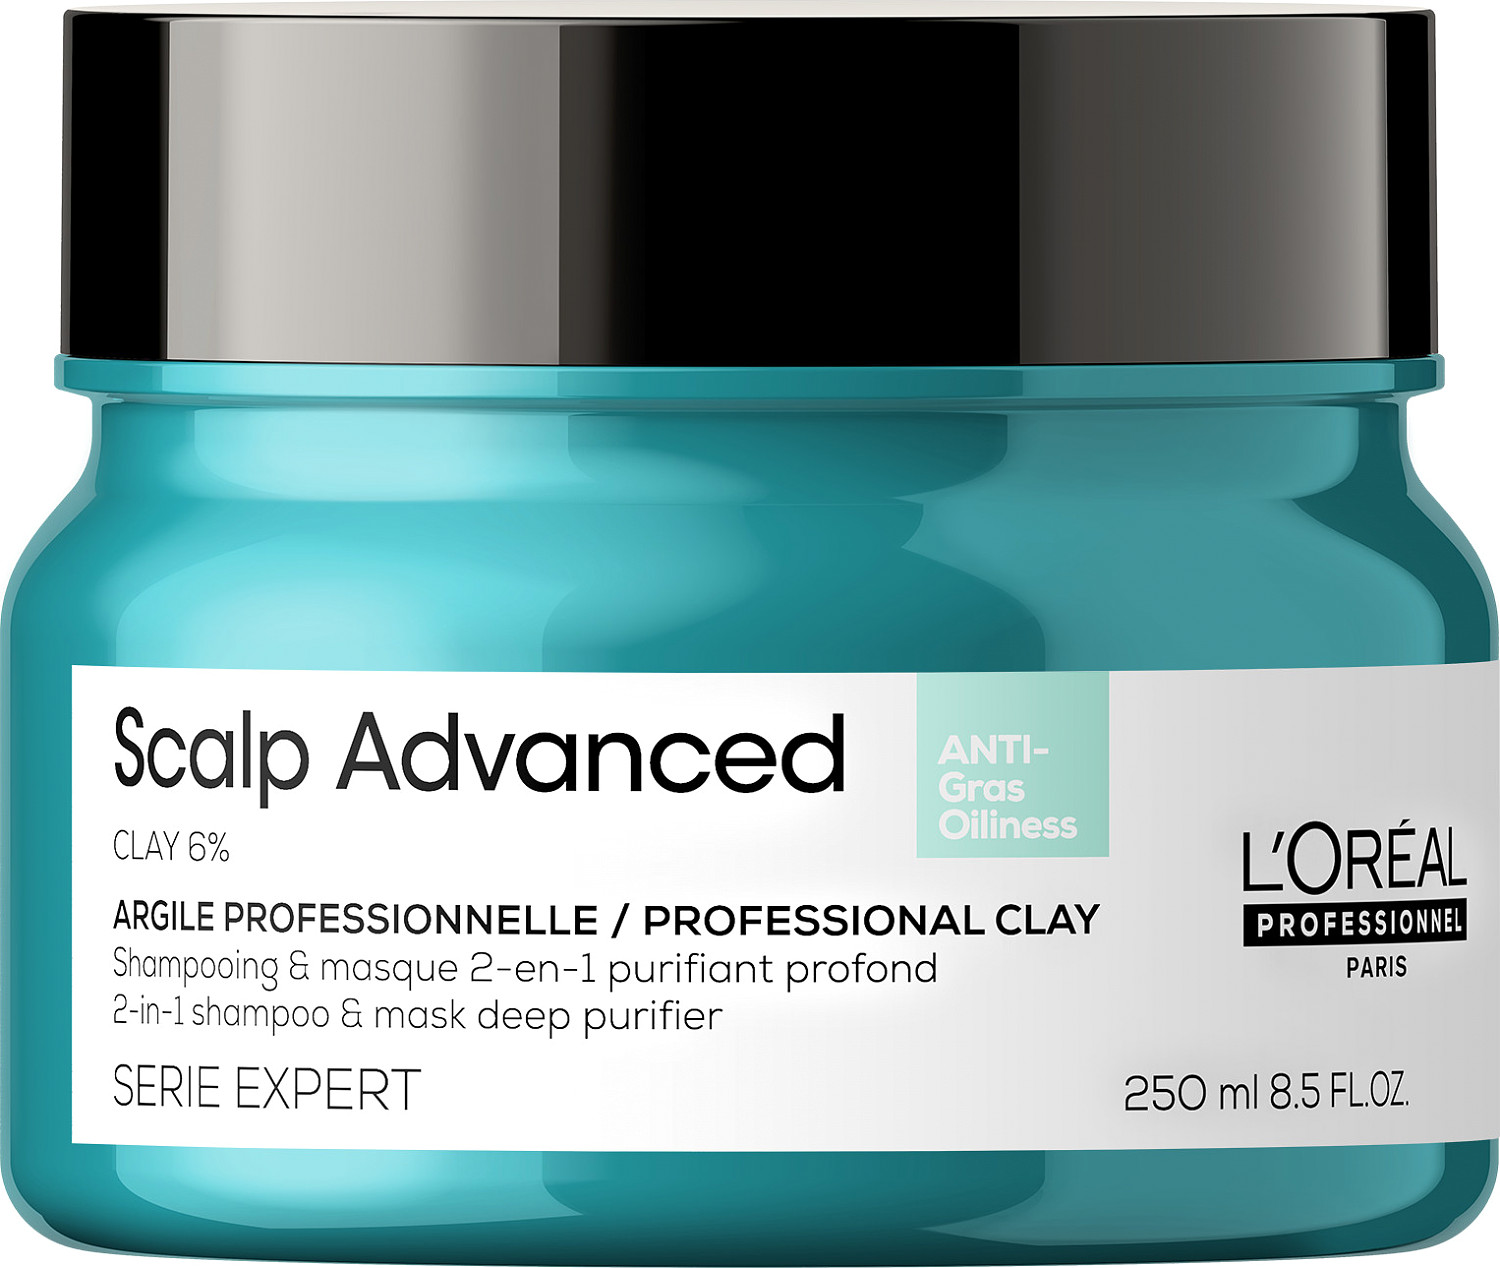  Loreal Serie Expert Scalp Advanced Anti-Oiliness 2in1 Deep Purifier Clay 250 ml 